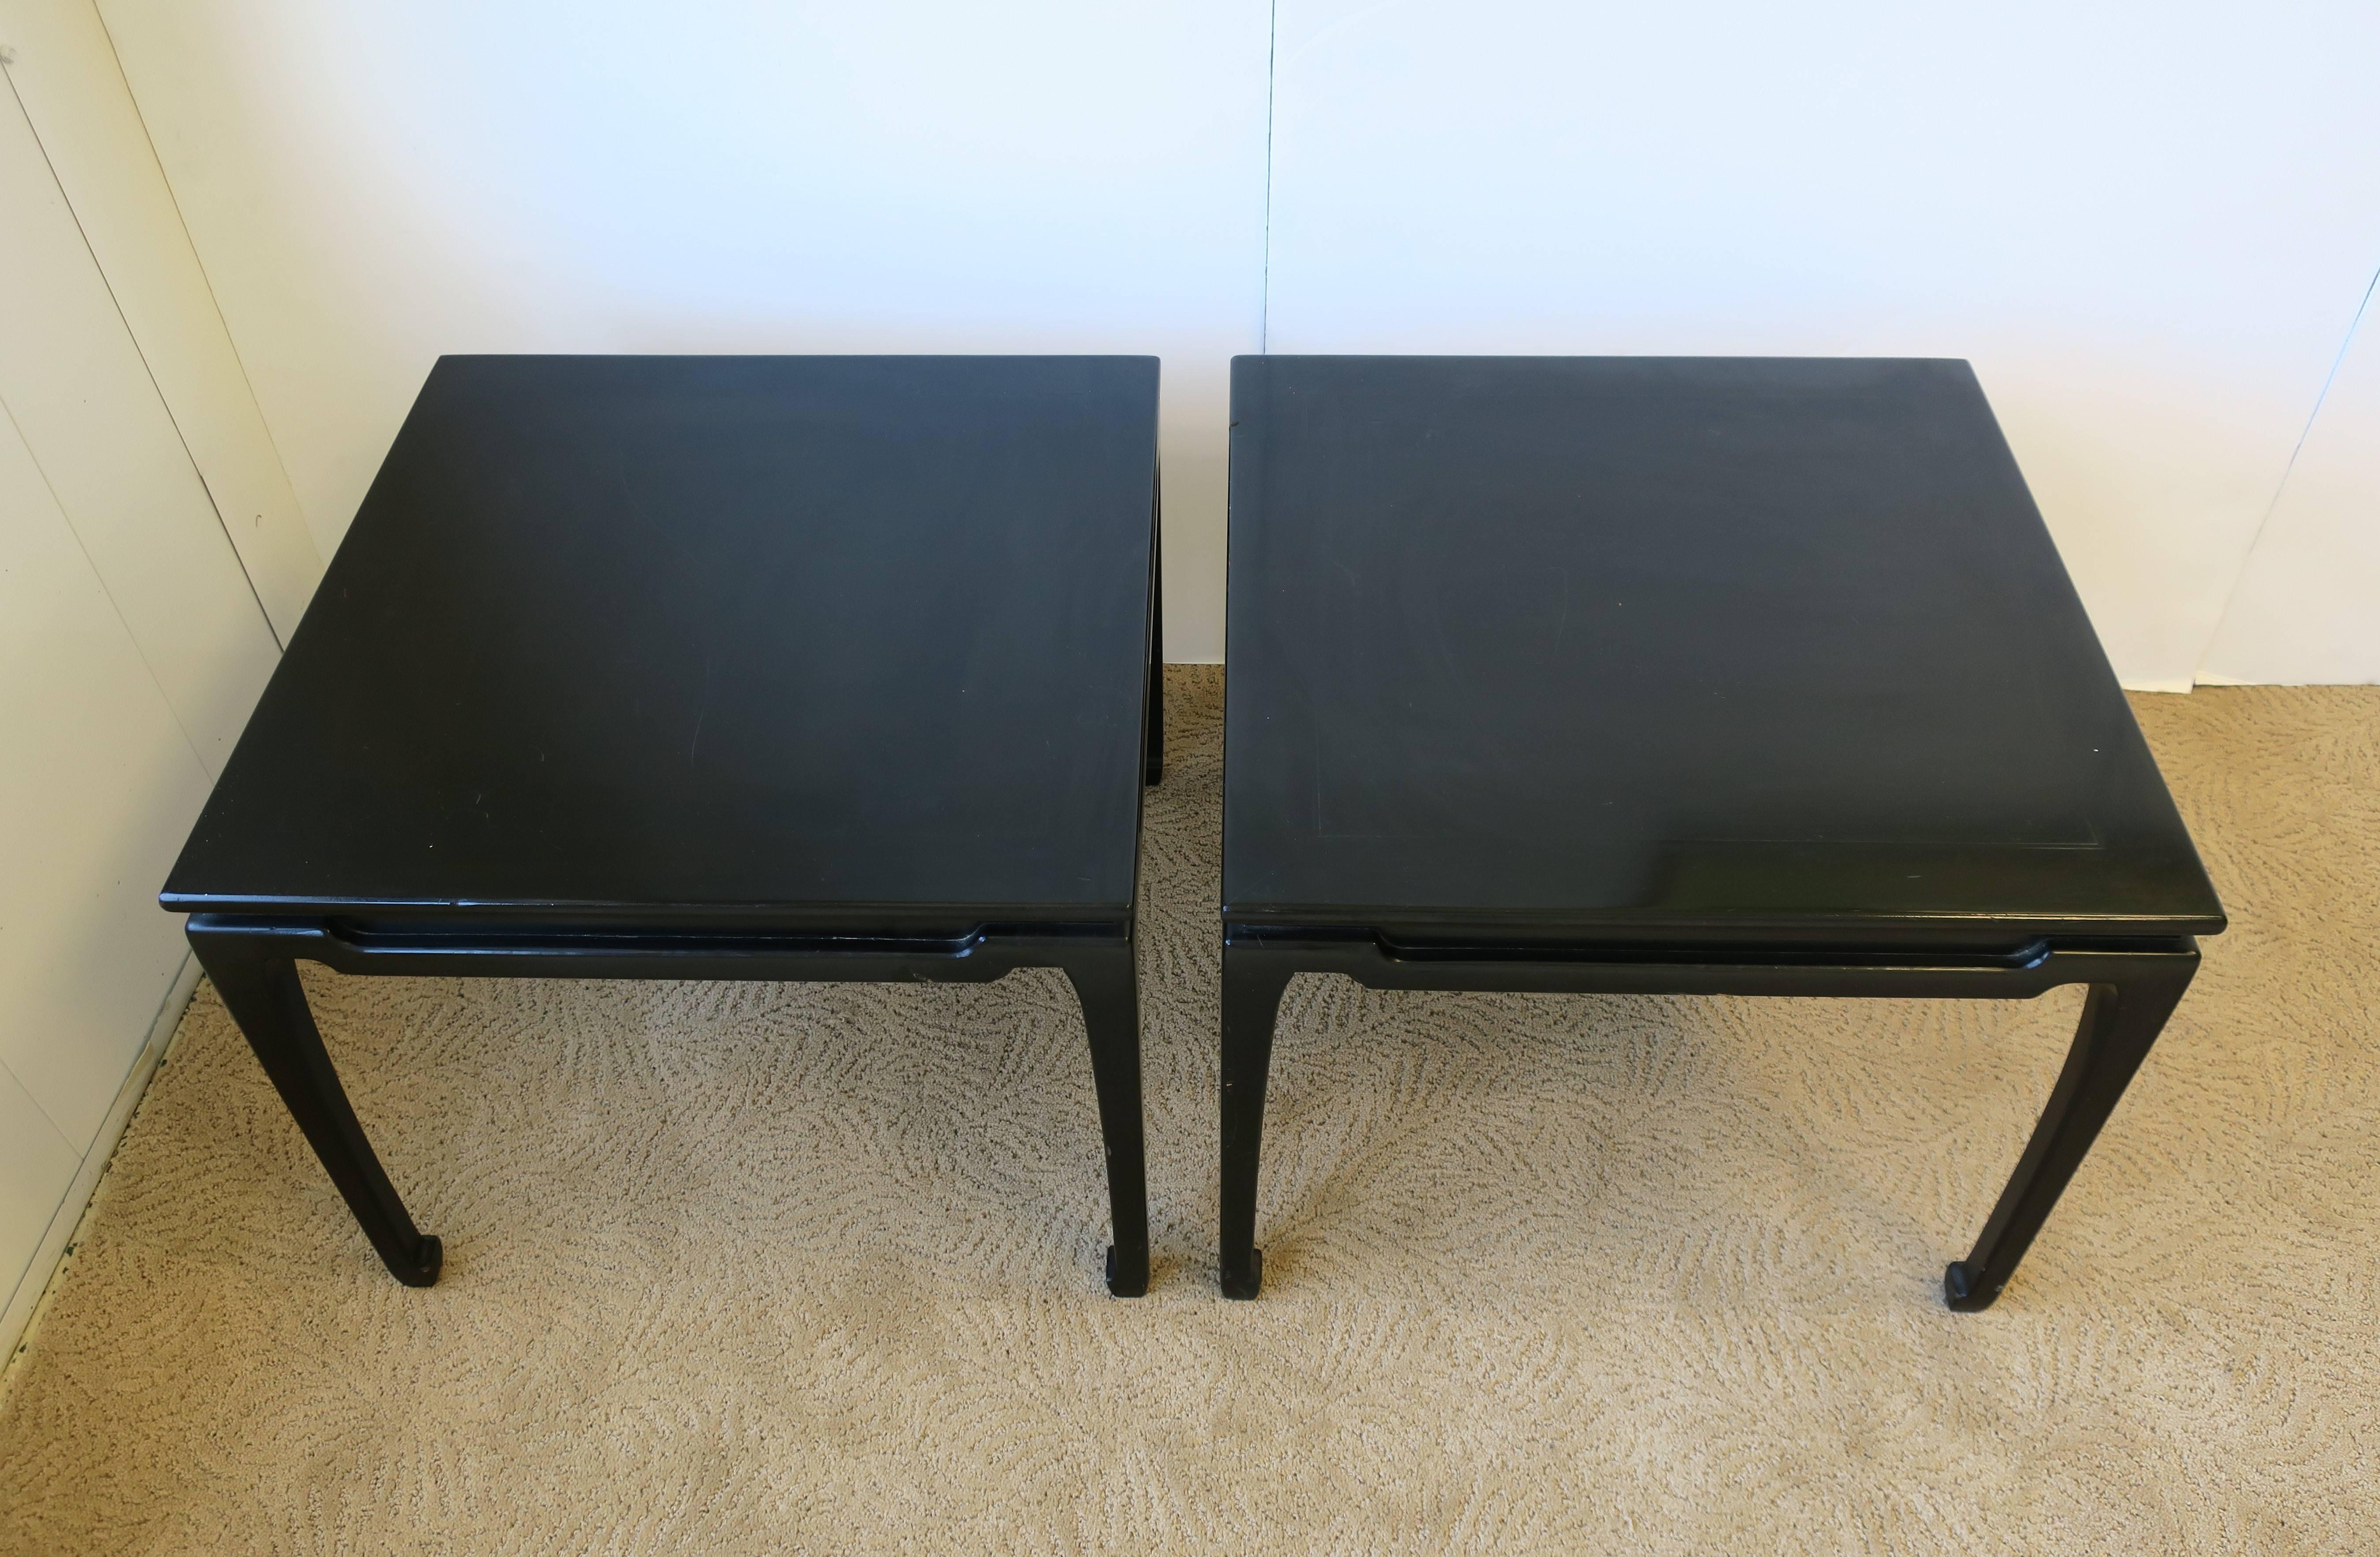 A beautiful pair of black lacquered wood end tables, circa 1970s. Black finish, professionally applied, has a nice sheen/shine (NOT a high gloss.) Tables can be used as end tables or side-by-side as a coffee/cocktail table. Modern lamp shown in